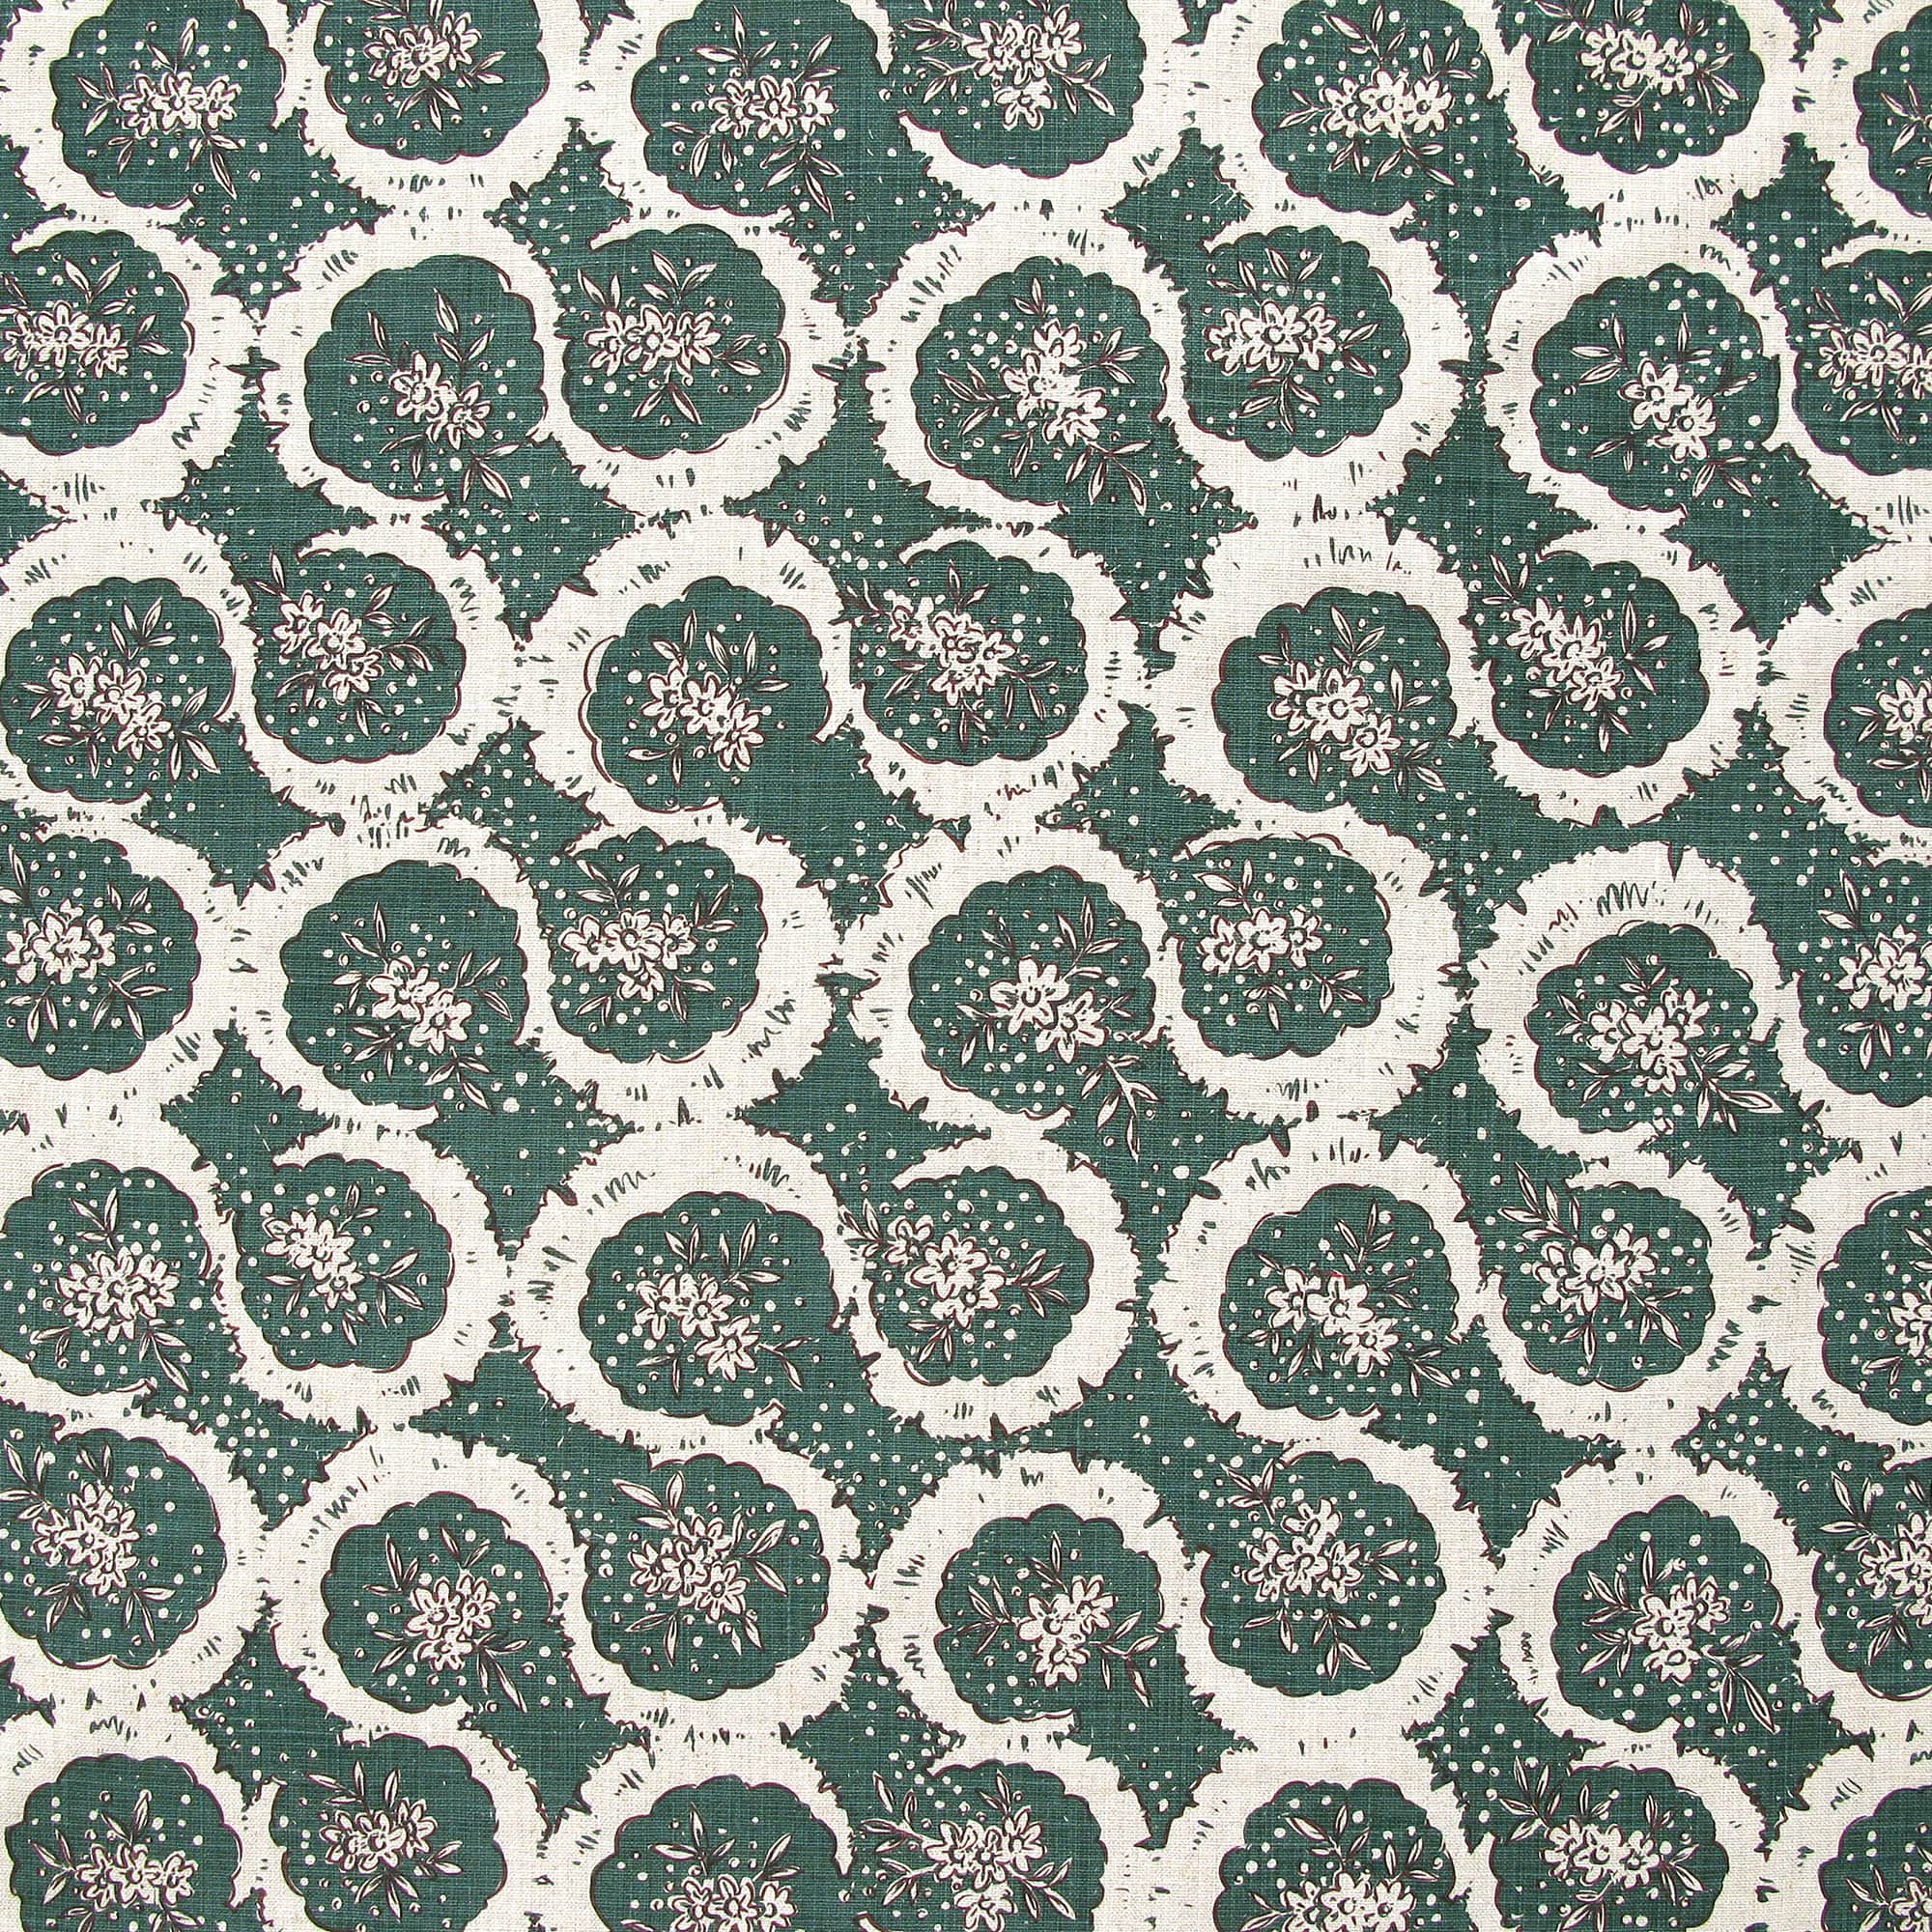 Detail of fabric in a meandering floral grid print in white and brown on a dark green field.